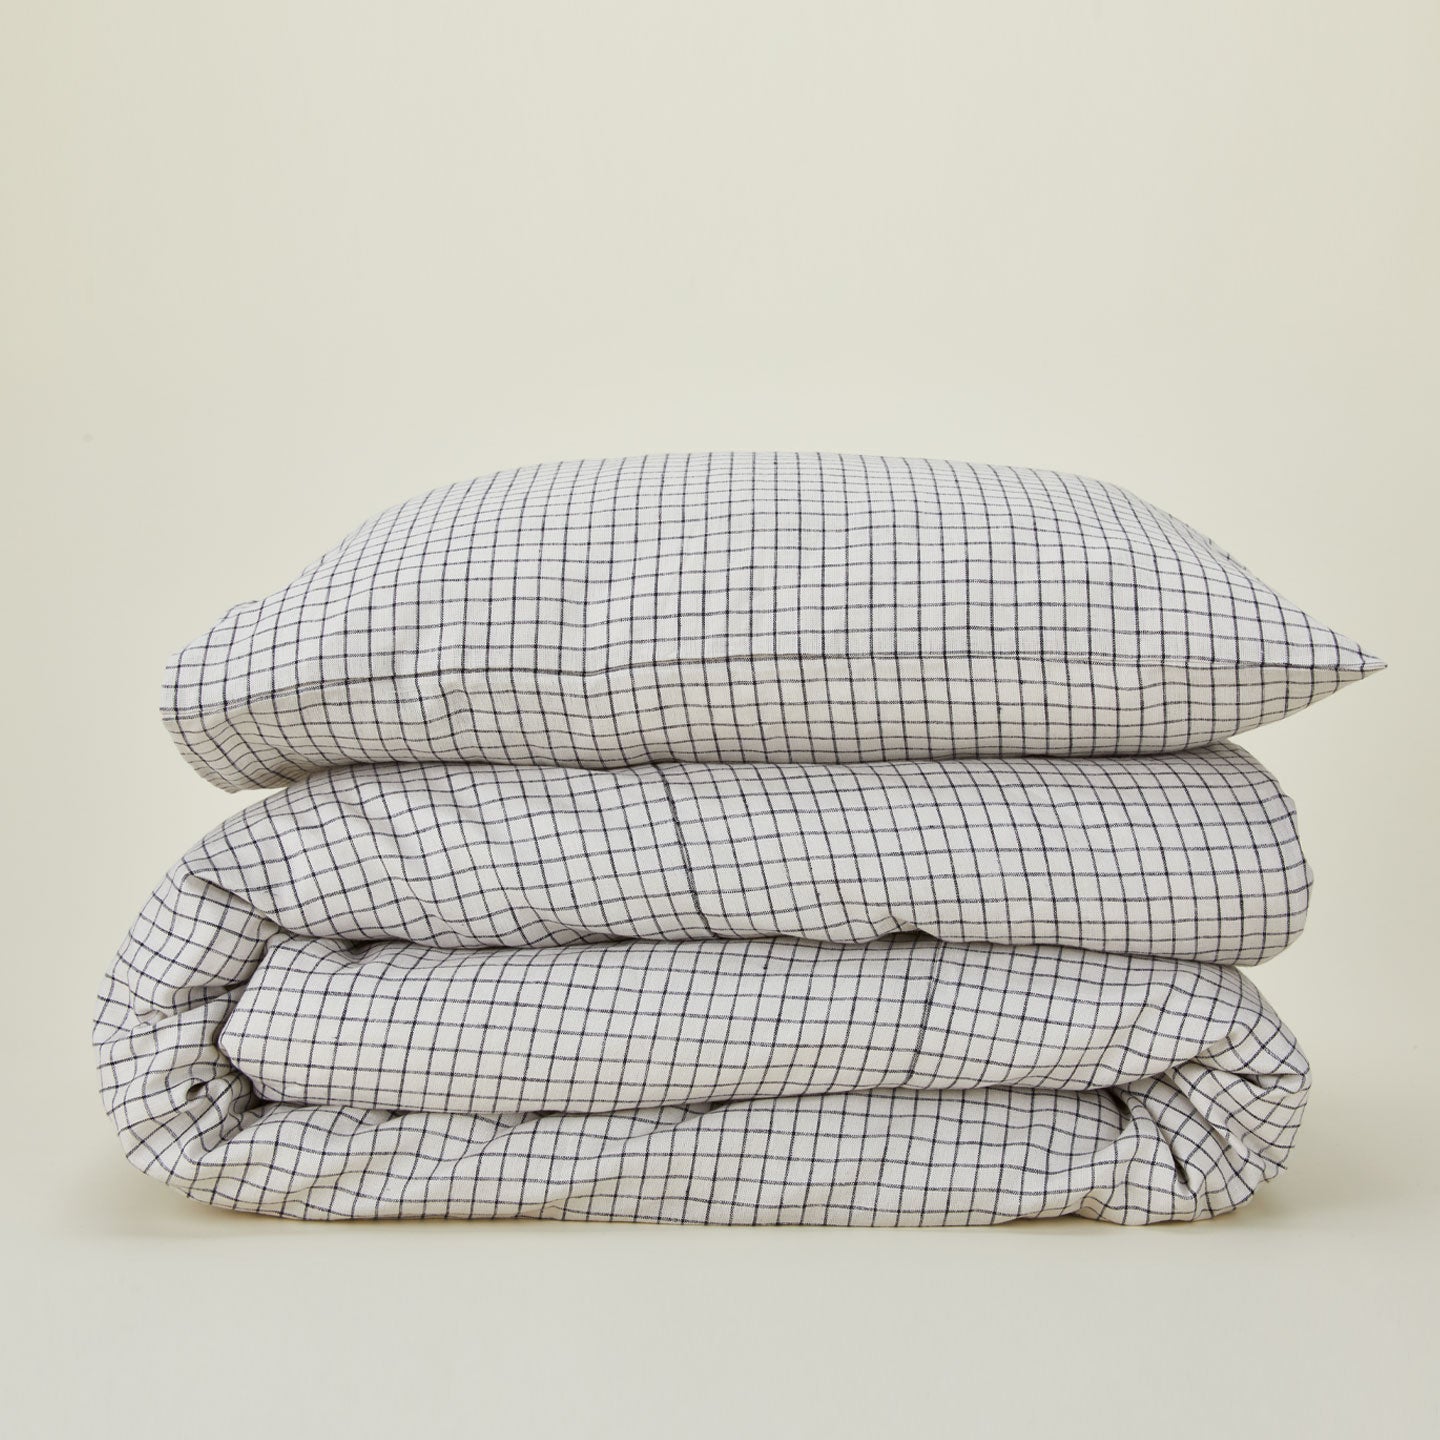 A folded checked linen duvet cover with a checked linen pillow case.